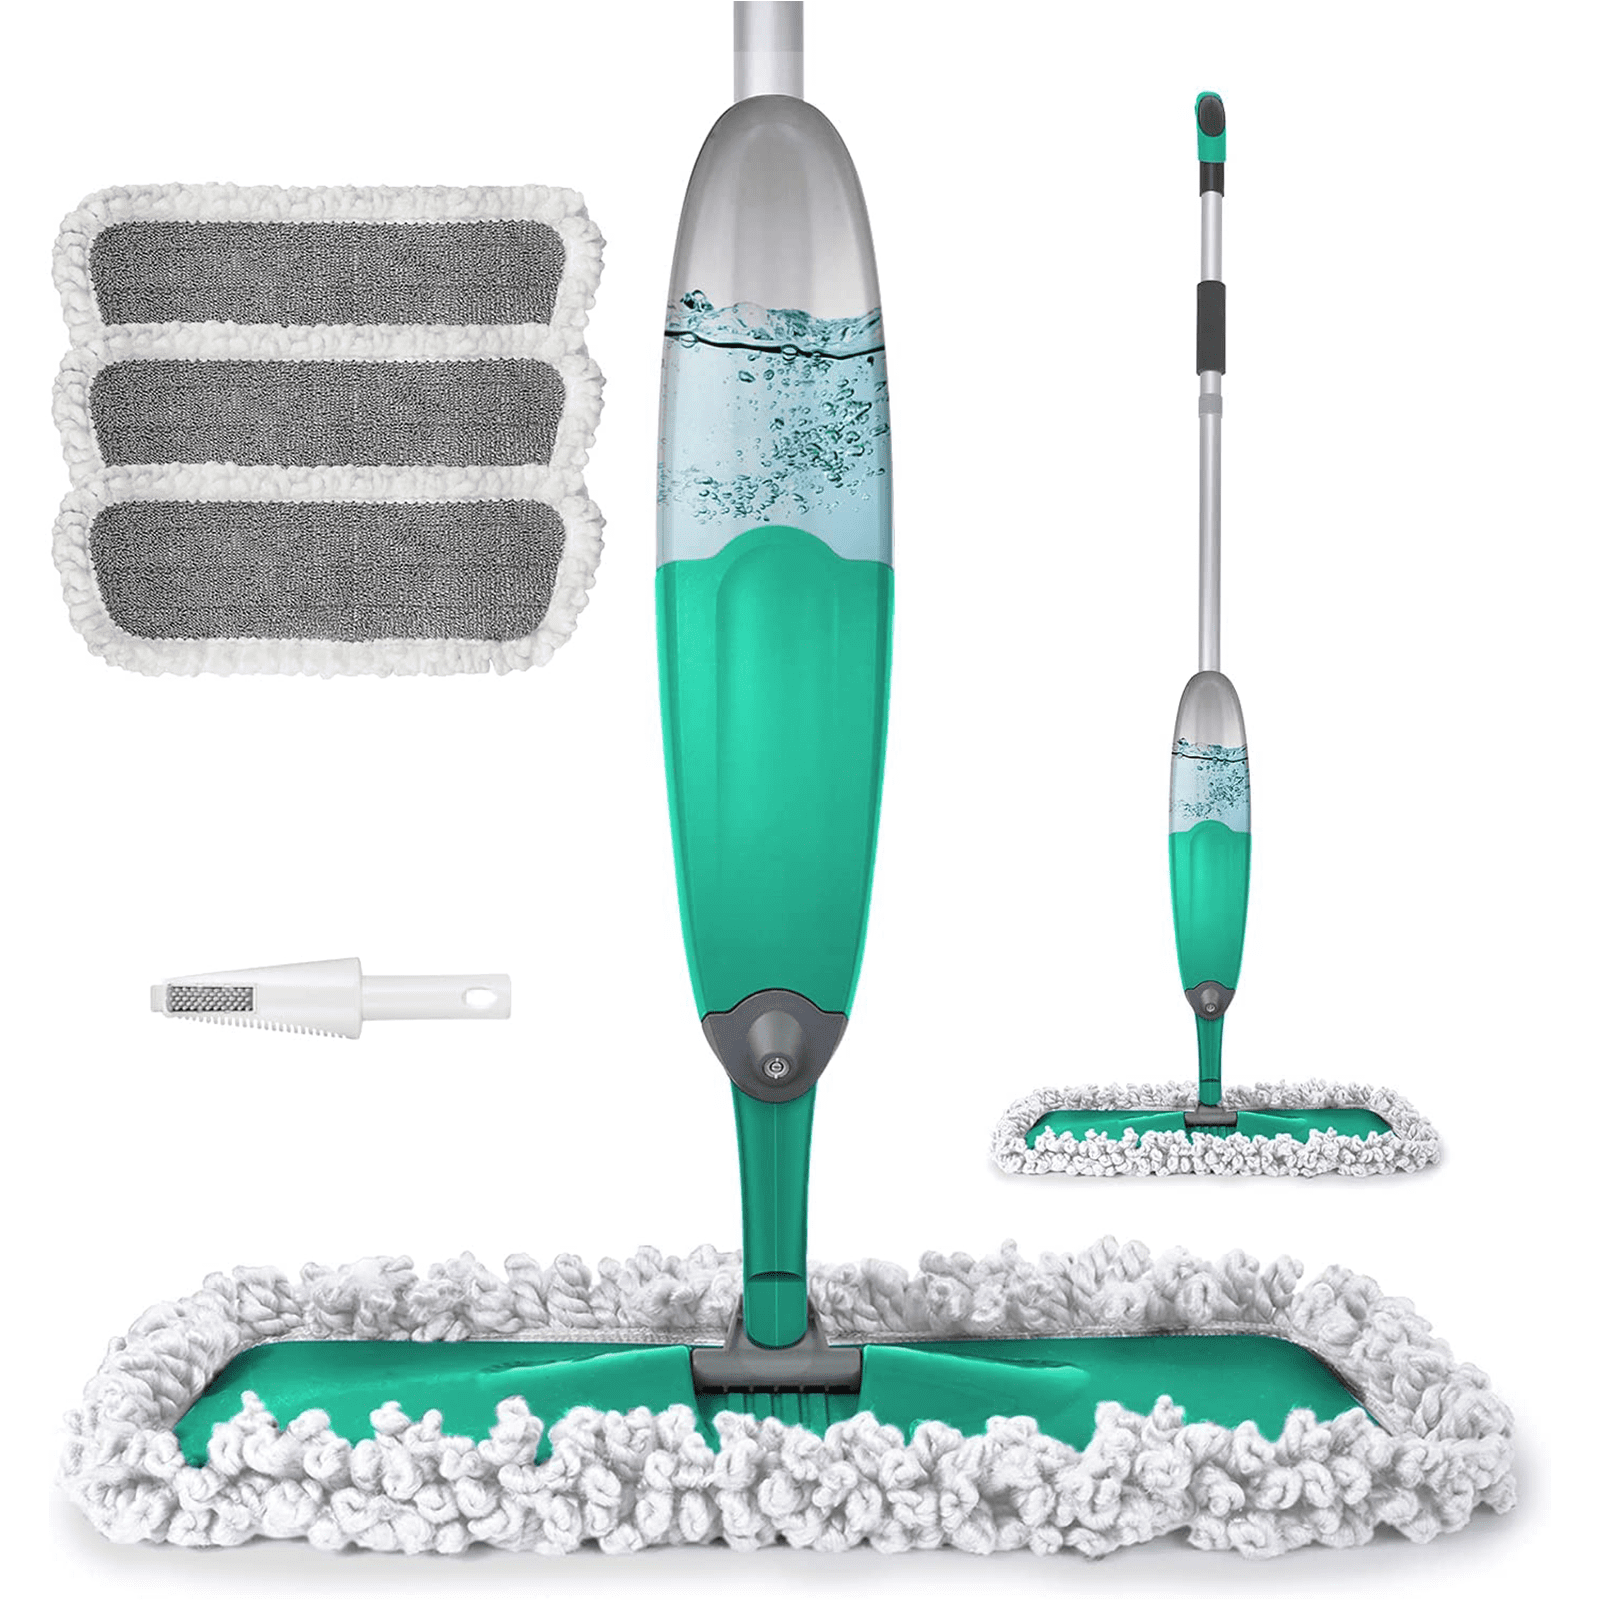 Dry Dust Mops vs. Wet Mops: Do You Need to Own Both?